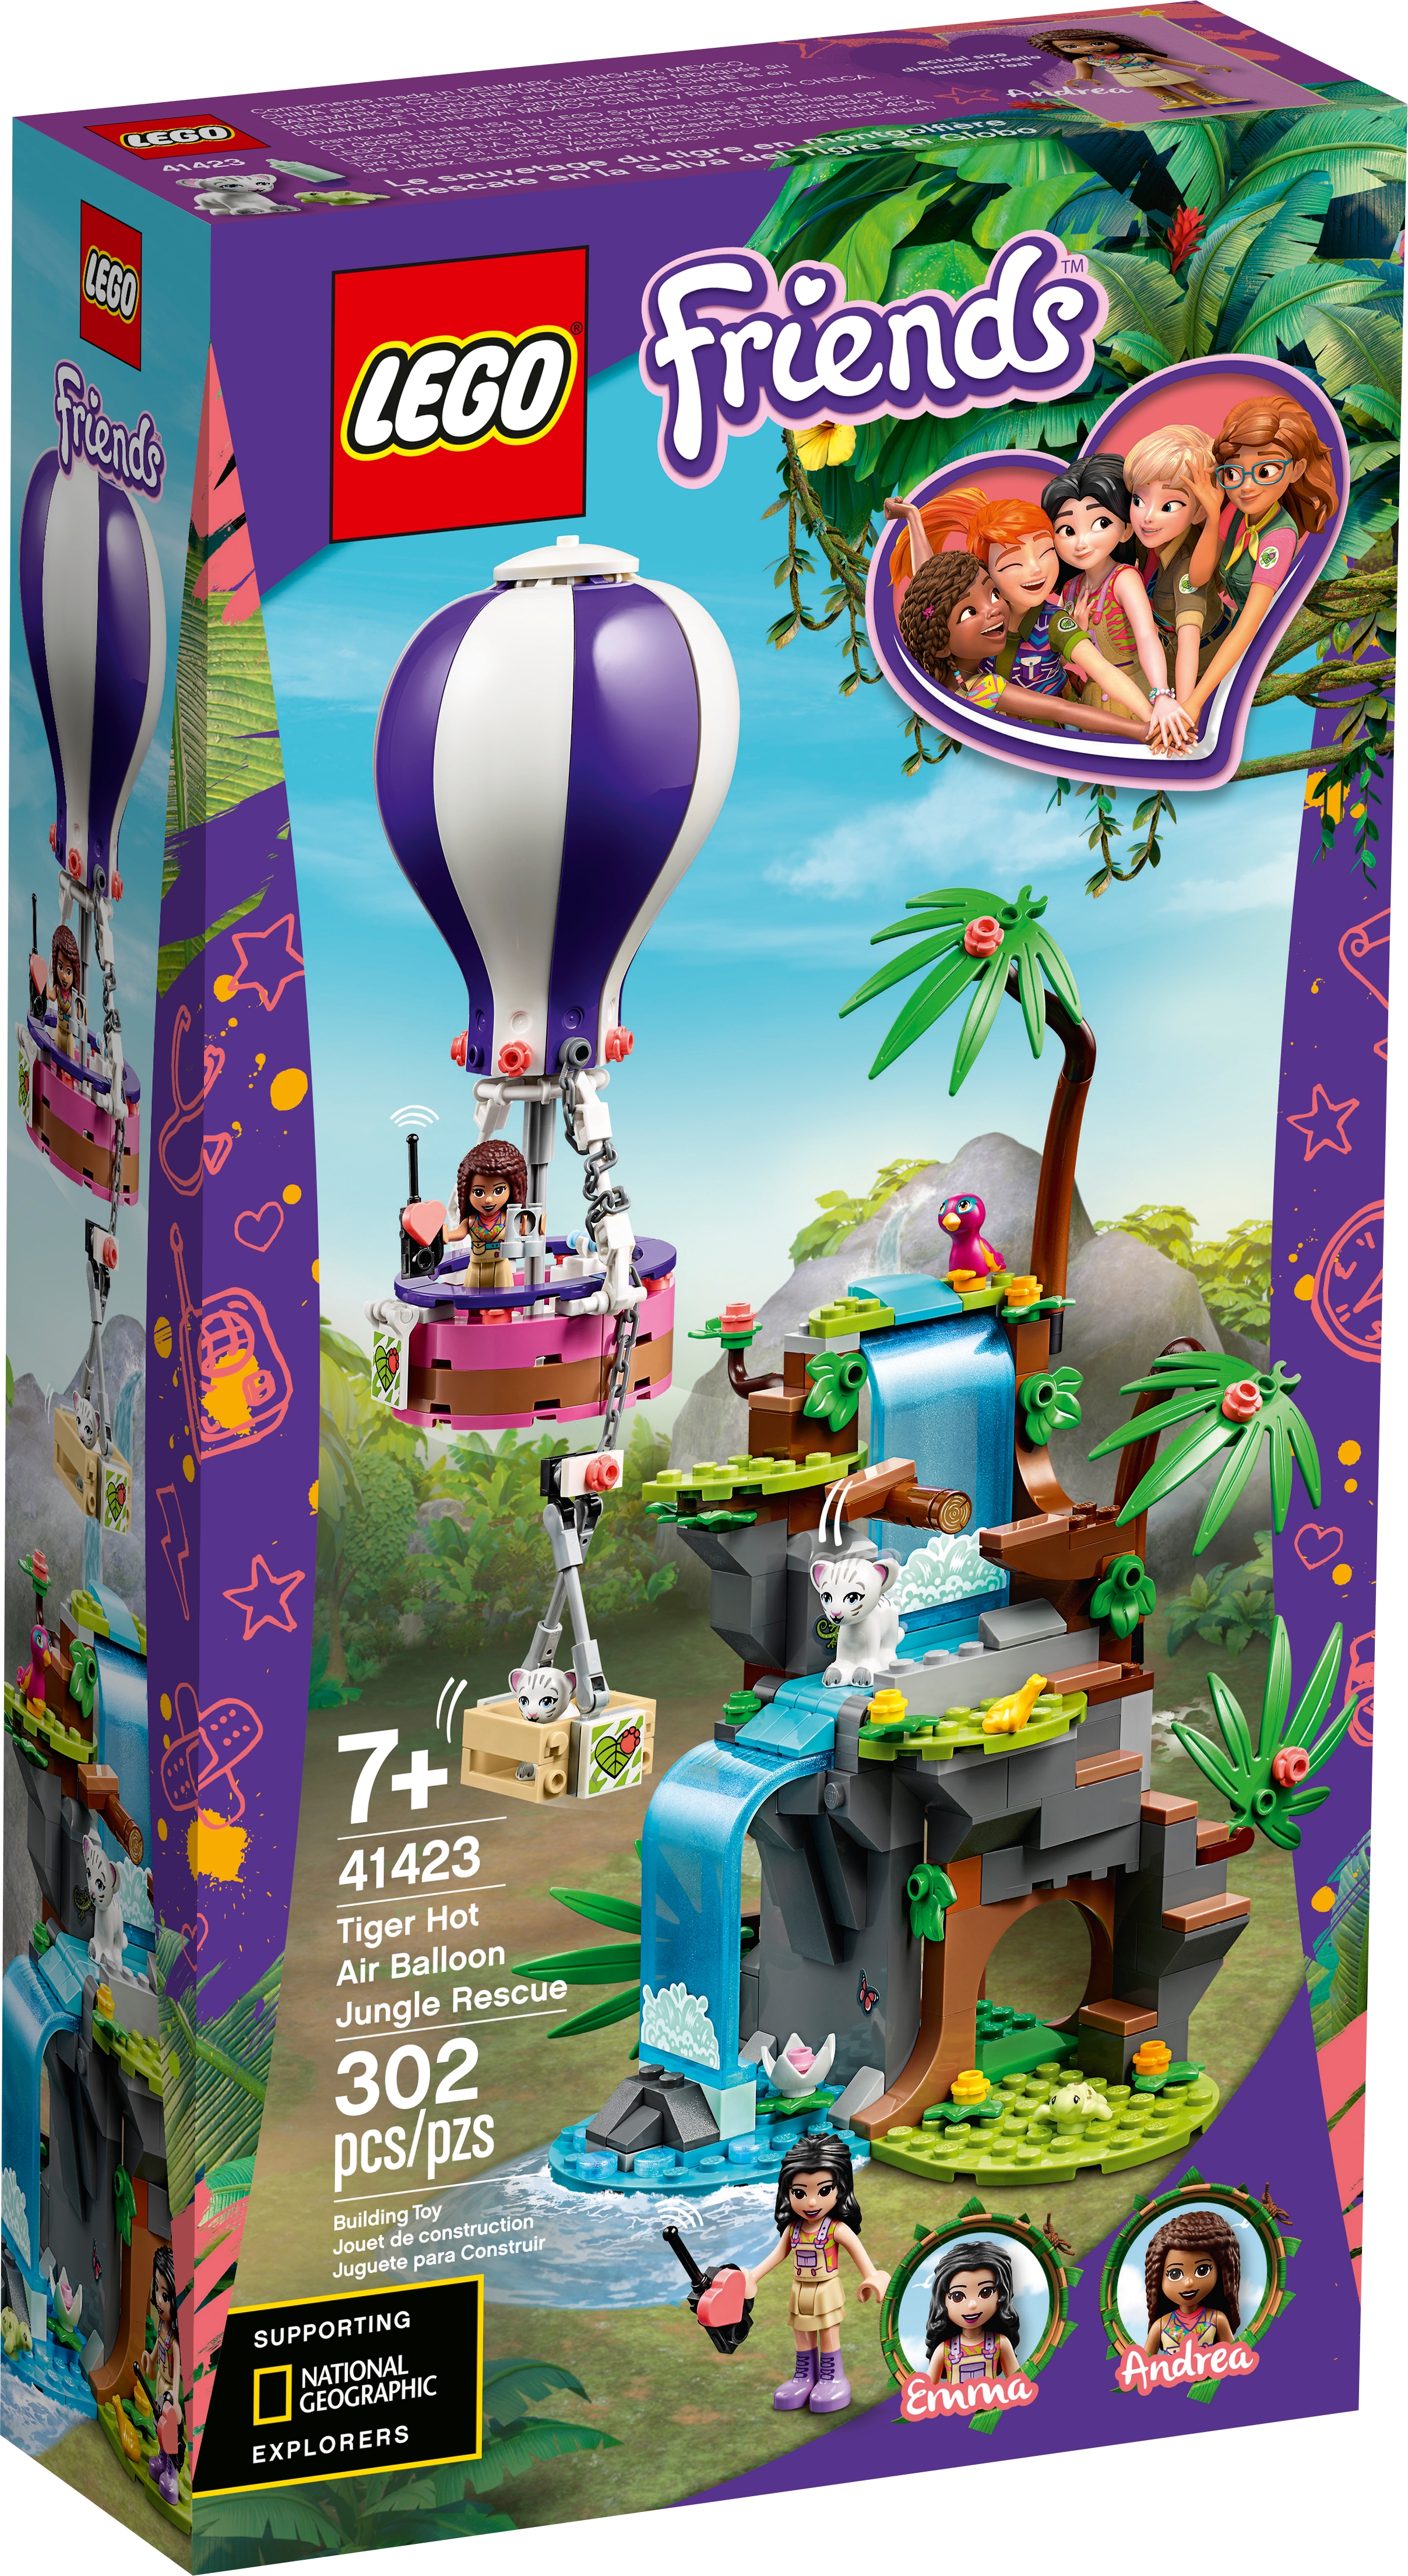 Tiger Hot Air Balloon Jungle 41423 | Friends | online at the Official Shop